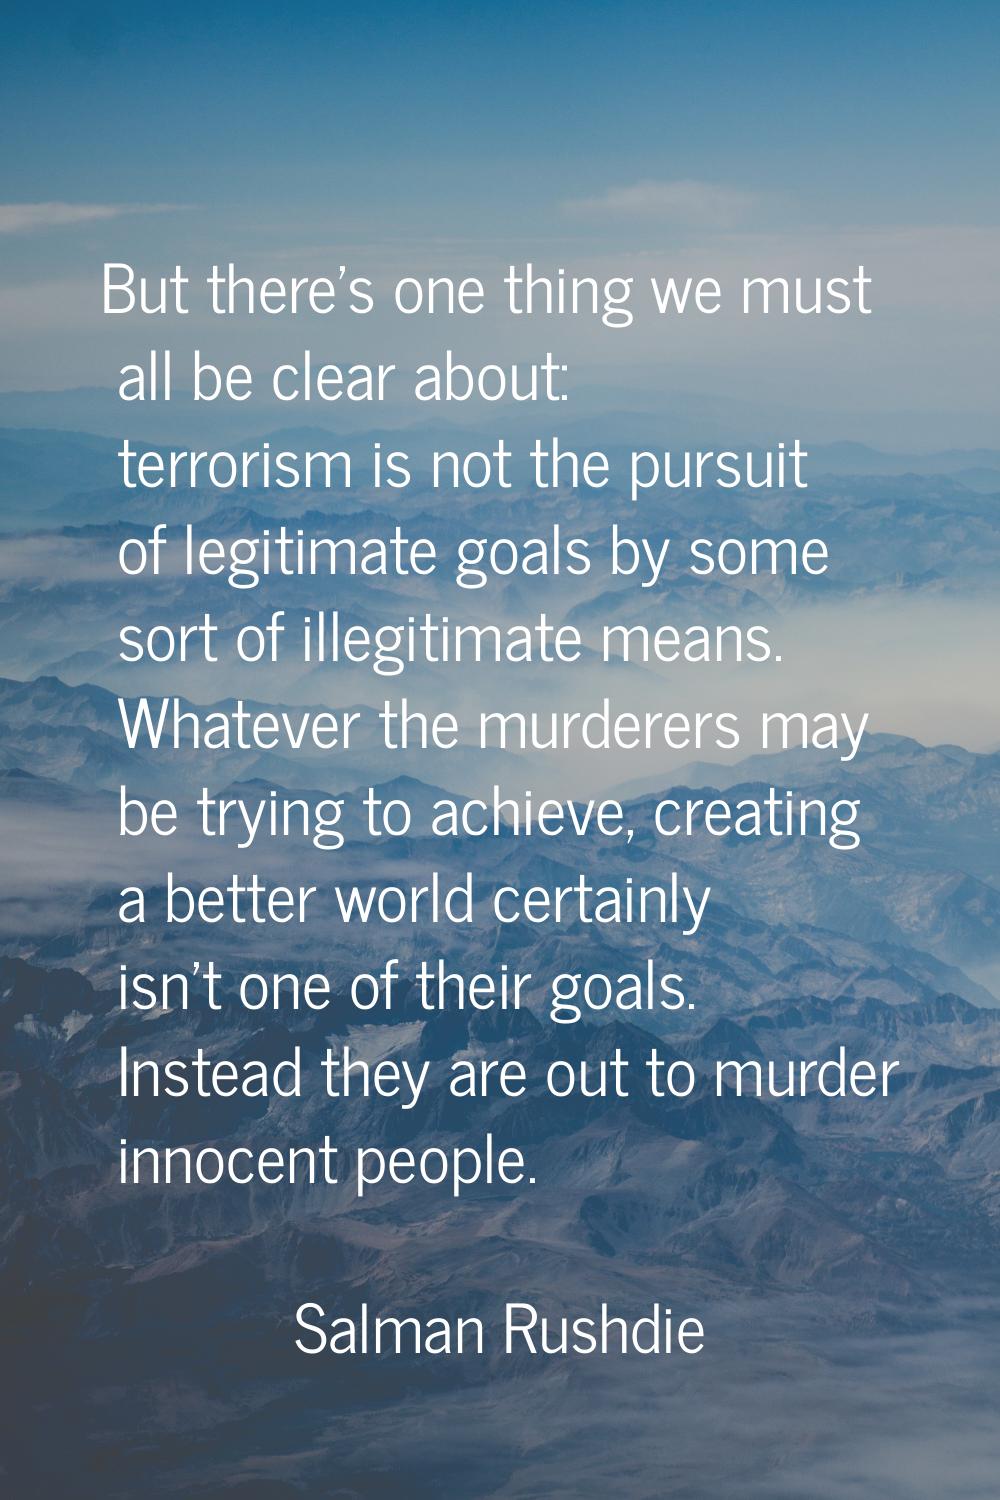 But there's one thing we must all be clear about: terrorism is not the pursuit of legitimate goals 